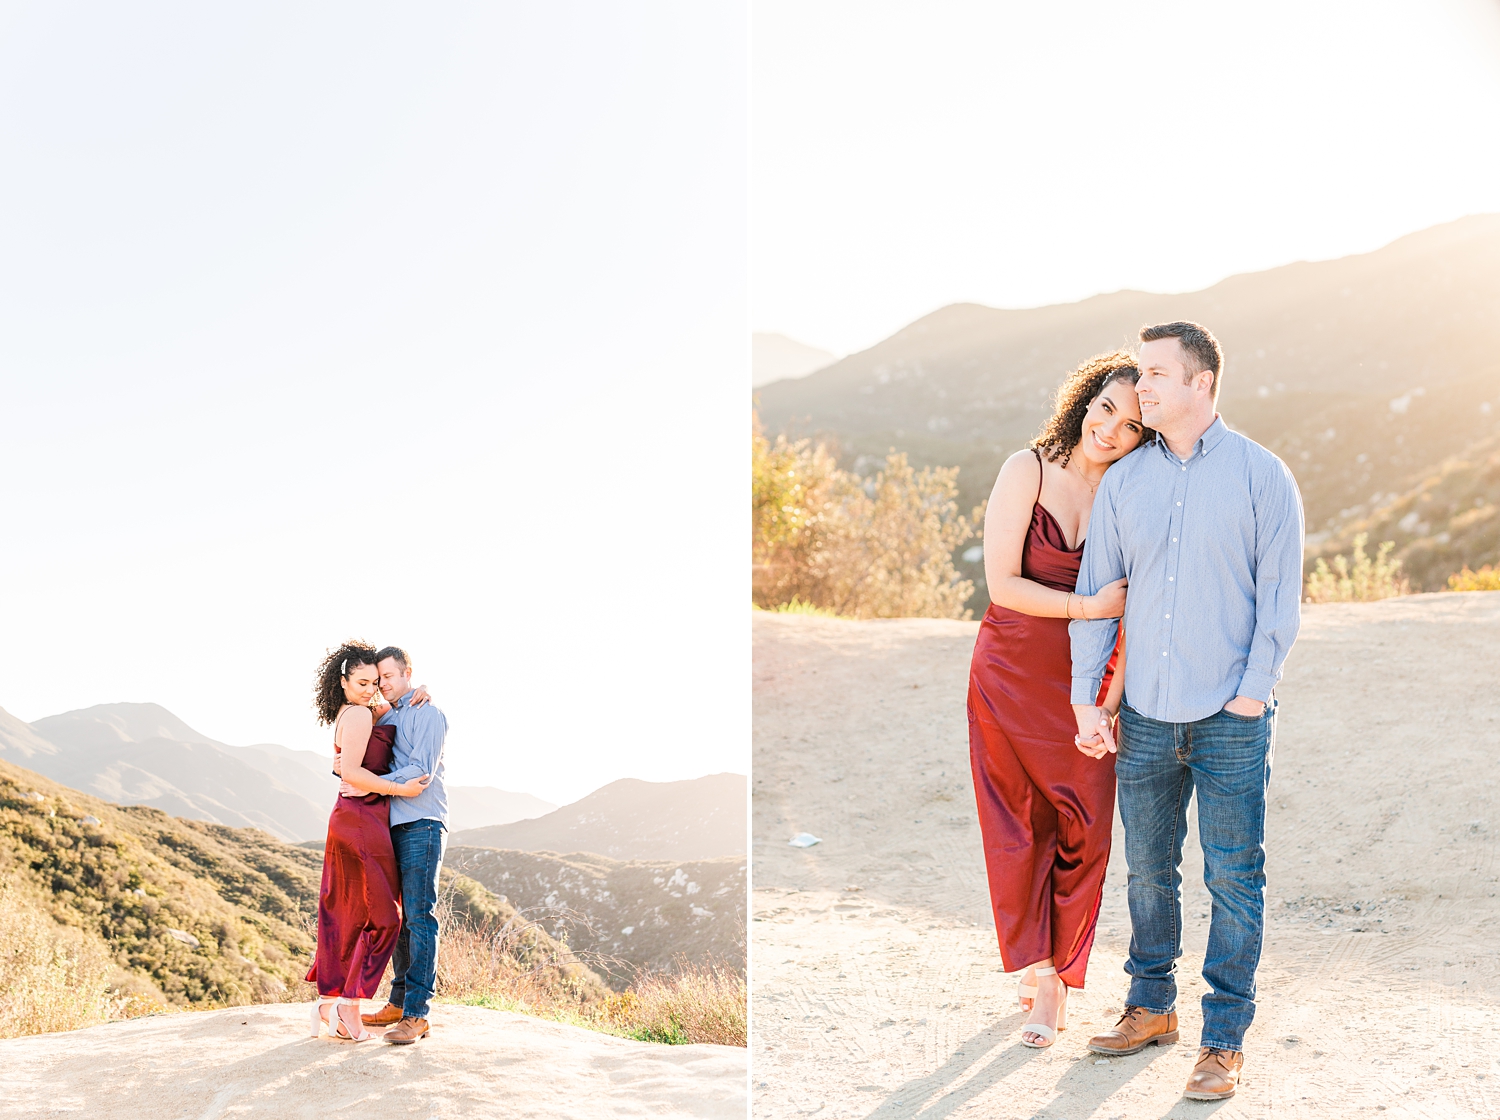 Engaged Couple poses in the Mountains for Engagement Photos